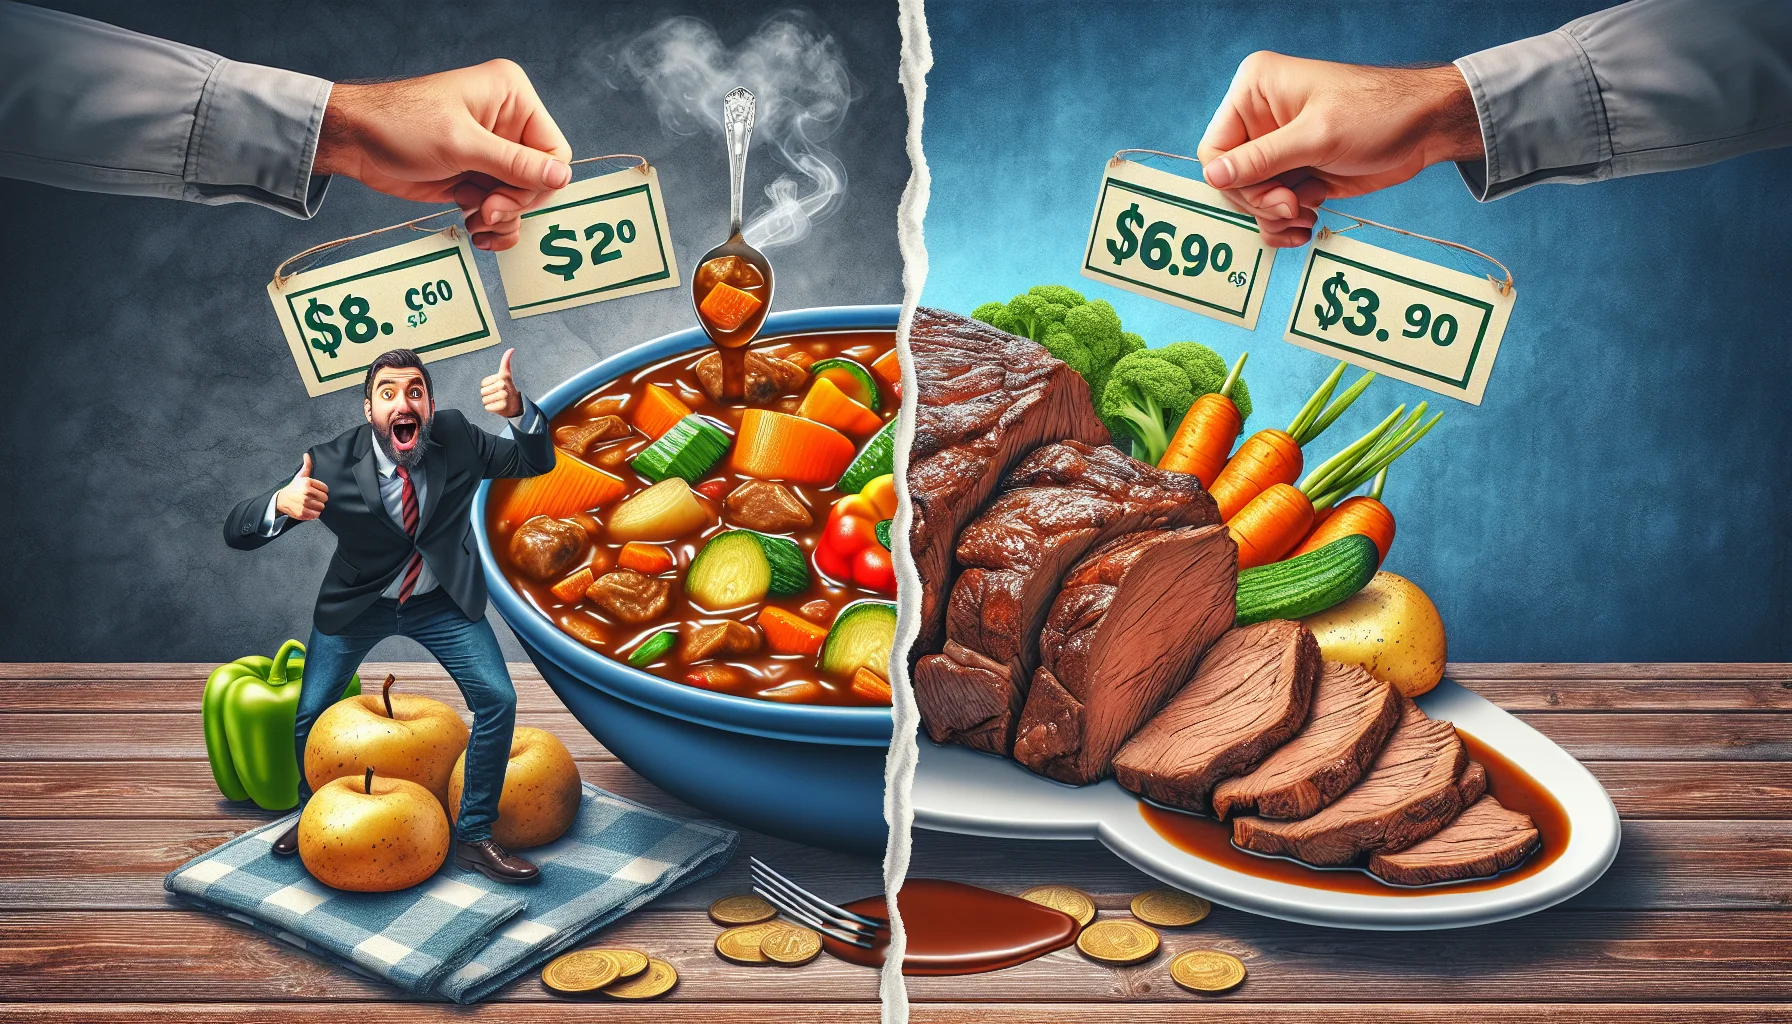 Visualize an amusing, realistic scene that demonstrates the affordable and healthy aspect of beef stew and pot roast. On one side of the image, show a steaming and appealing bowl of beef stew, vibrant with colorful vegetables and rich brown gravy. On the other side, present a juicy, glistening pot roast, plated artistically with roasted potatoes and carrots on the side. Merge both scenes humorously by adding exaggerated price tags showing the beef stew is cheaper with a thumbs-up sign, and a surprised onlooker near the pot roast with an empty wallet, to underscore the health and economic benefits.